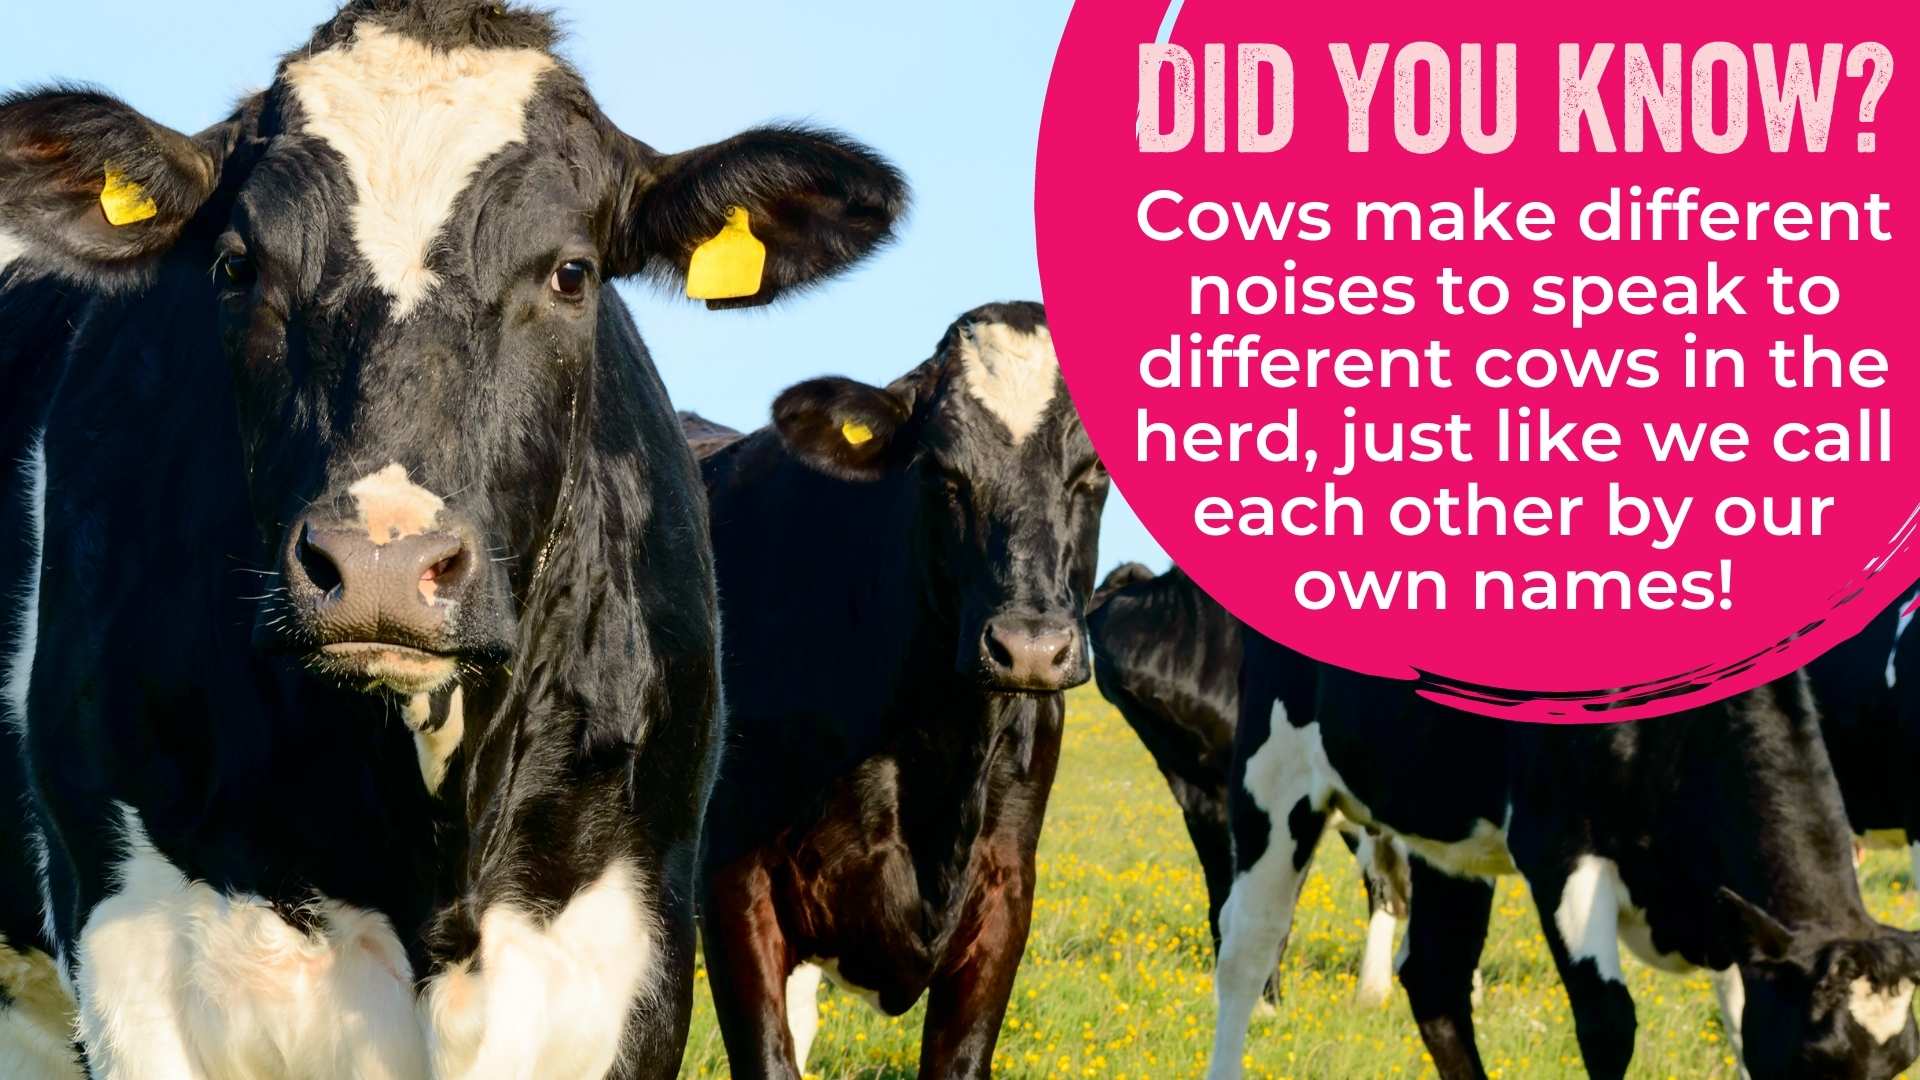 Cows make different noises to speak to different cows in the herd, just like we call each other by our own names!